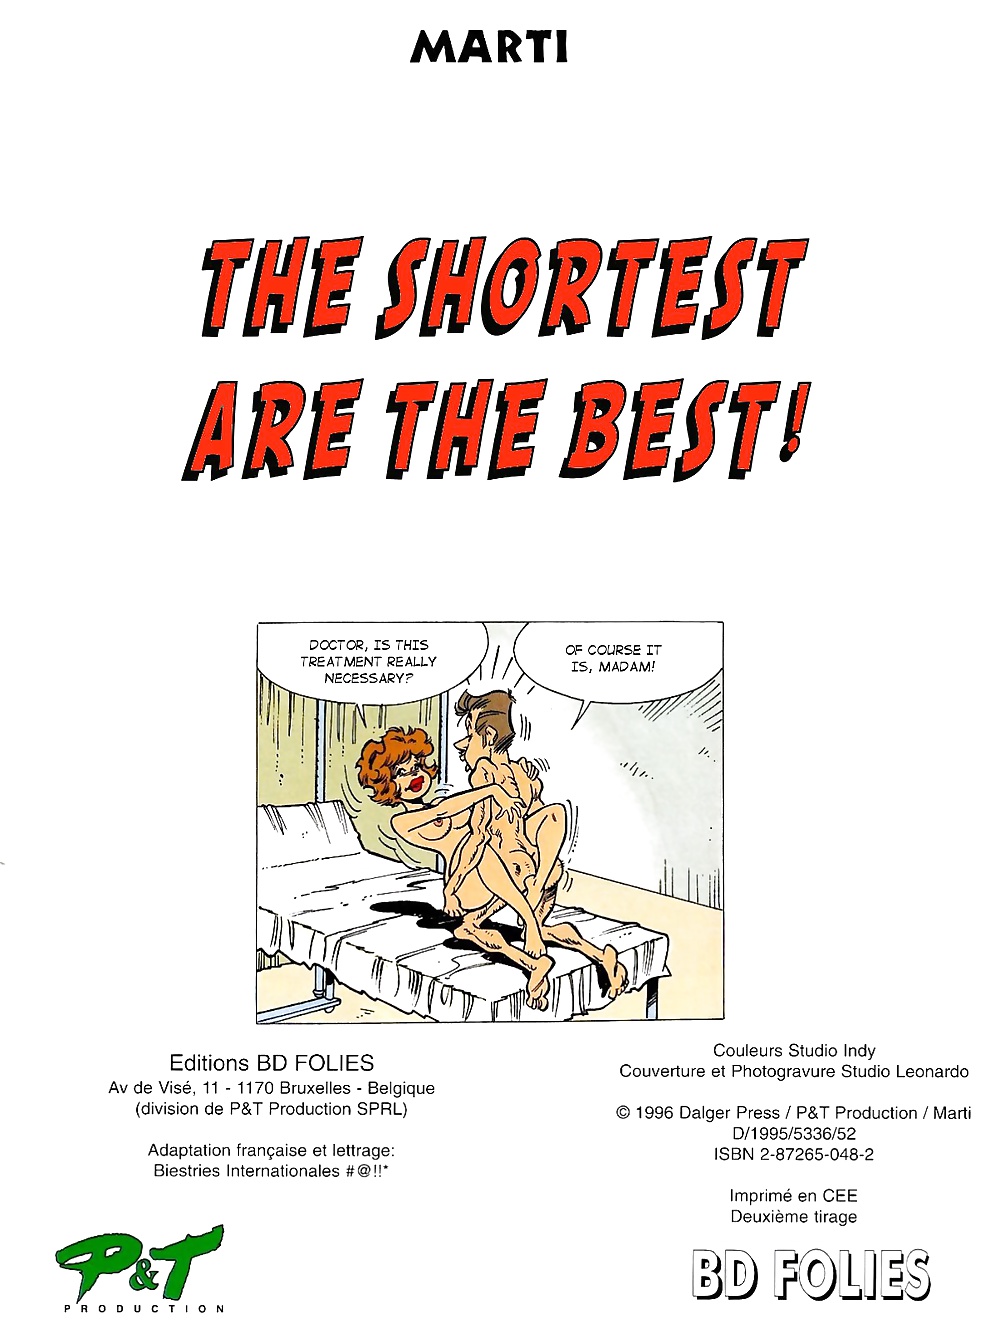 The Shortest are The Best by Marti #34412580